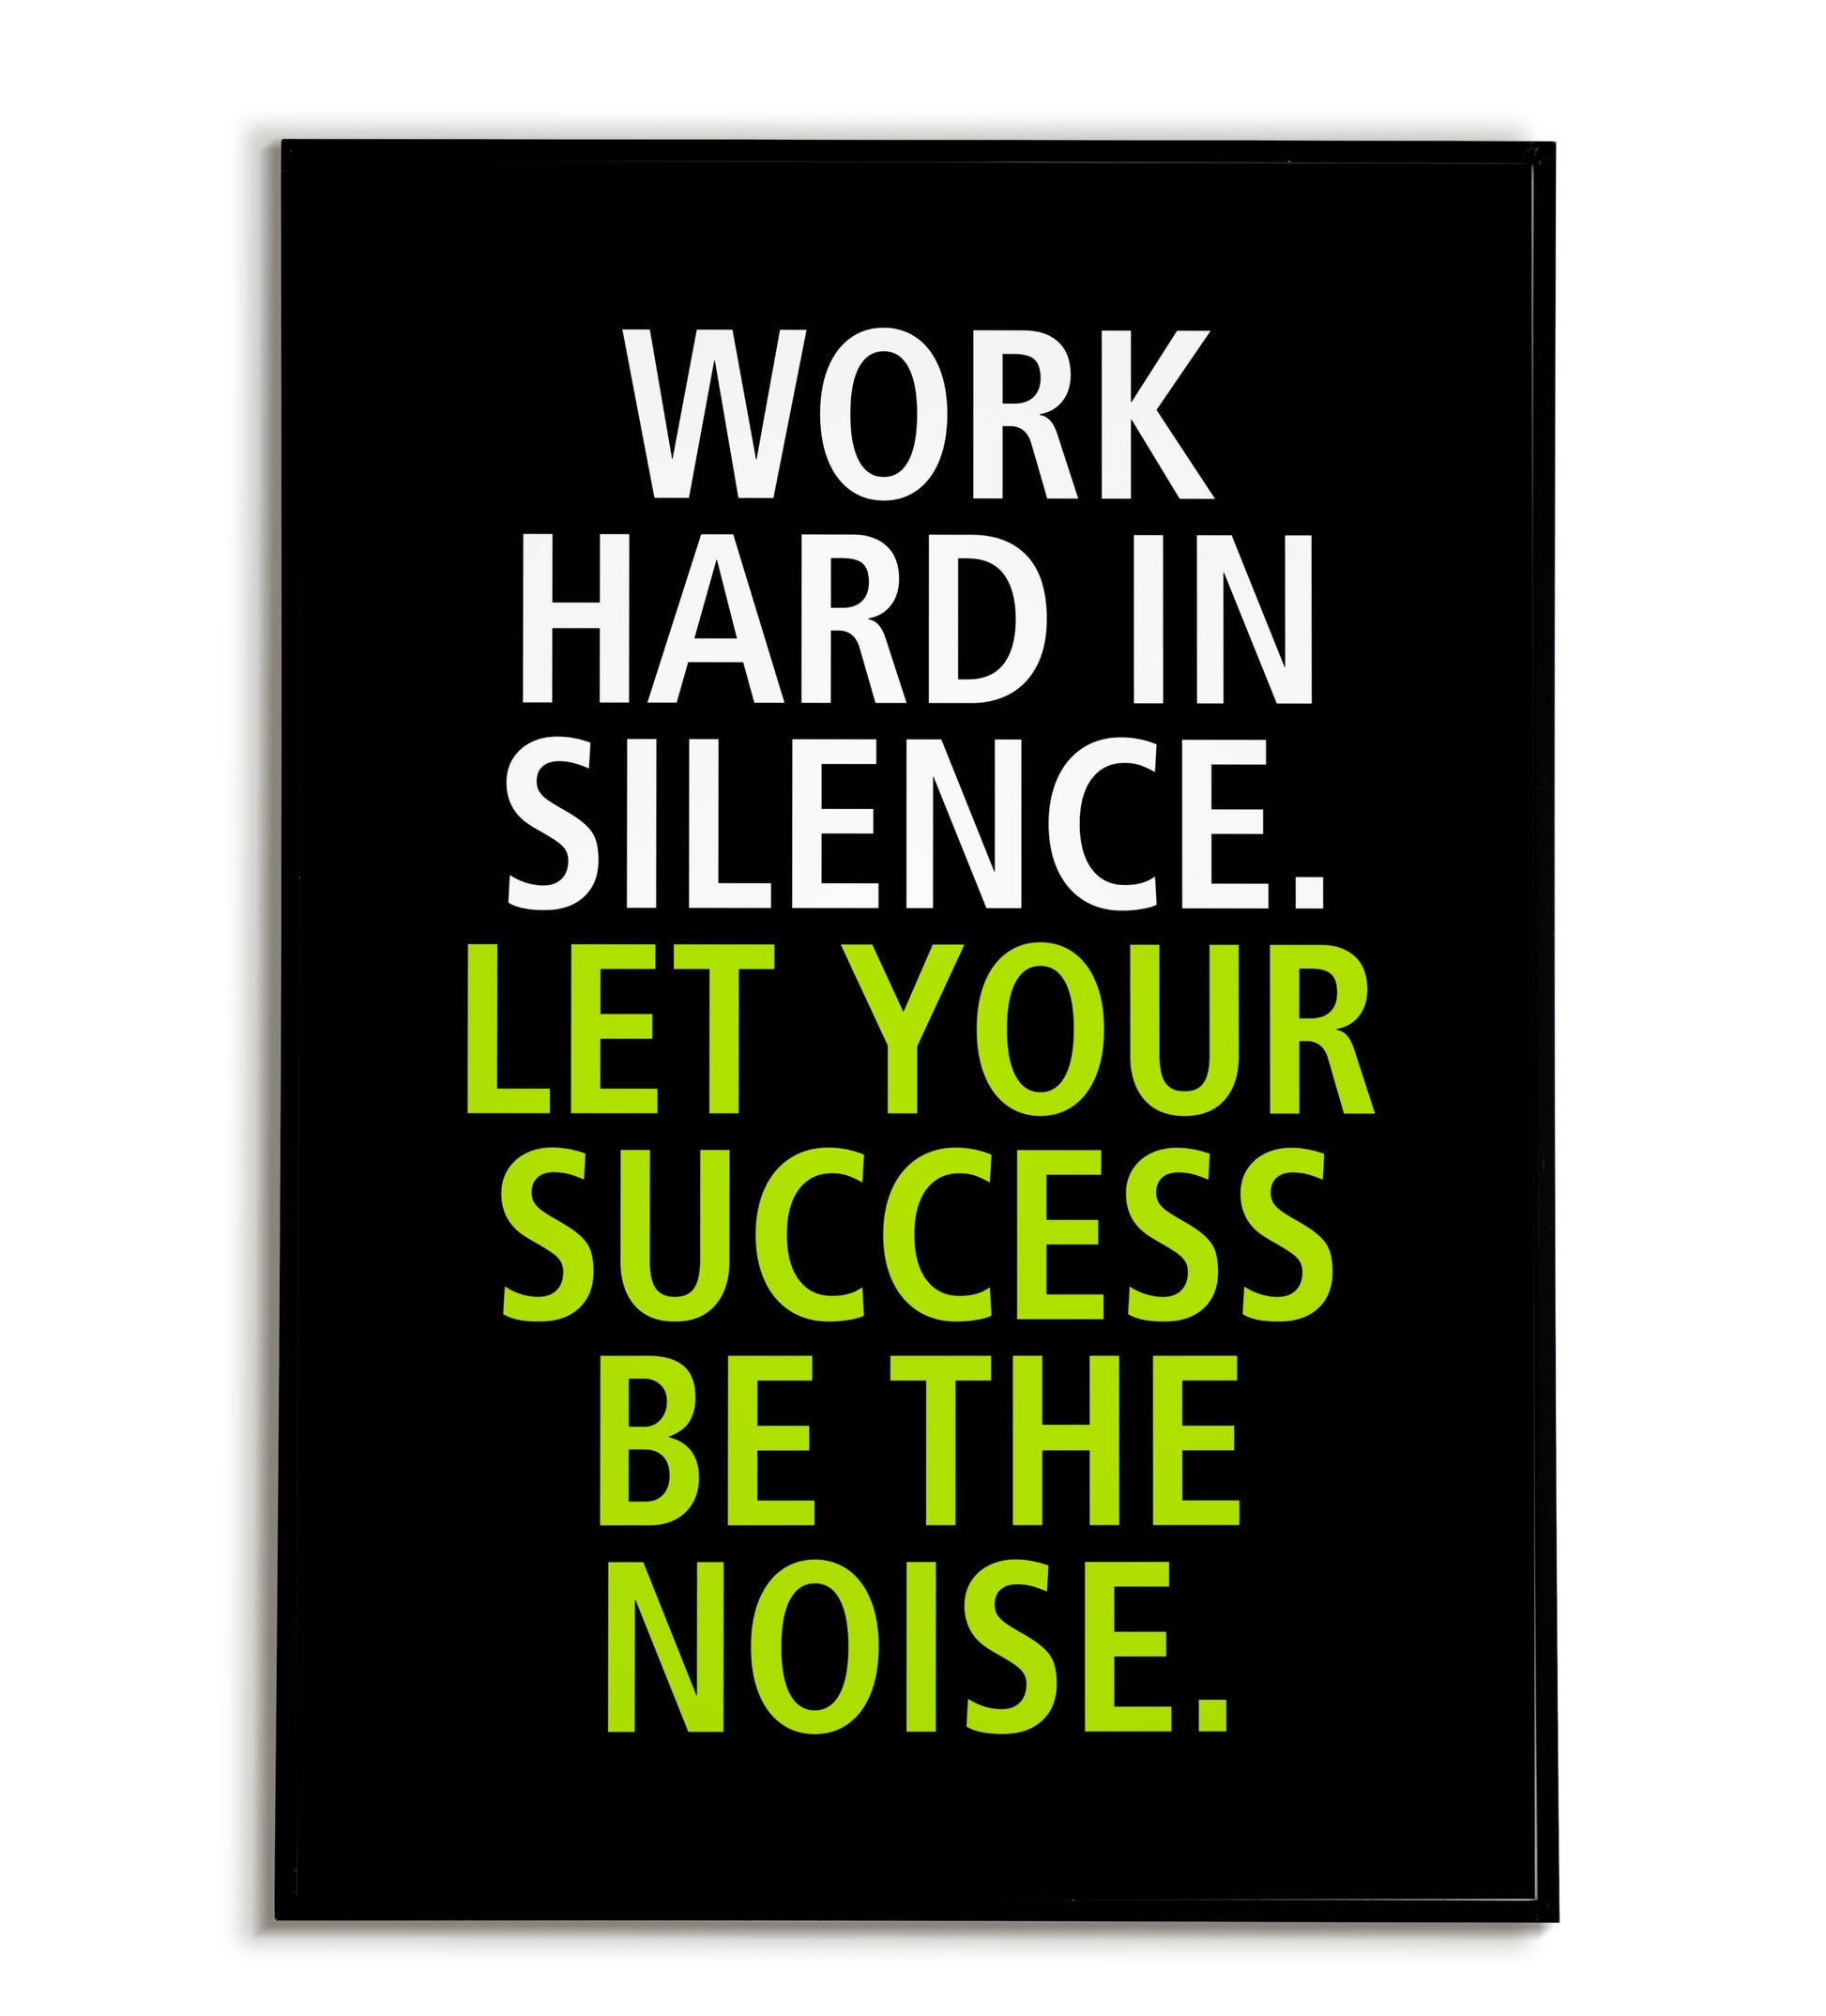 "Work hard in silence. Let your success be the noise" printable motivational poster.